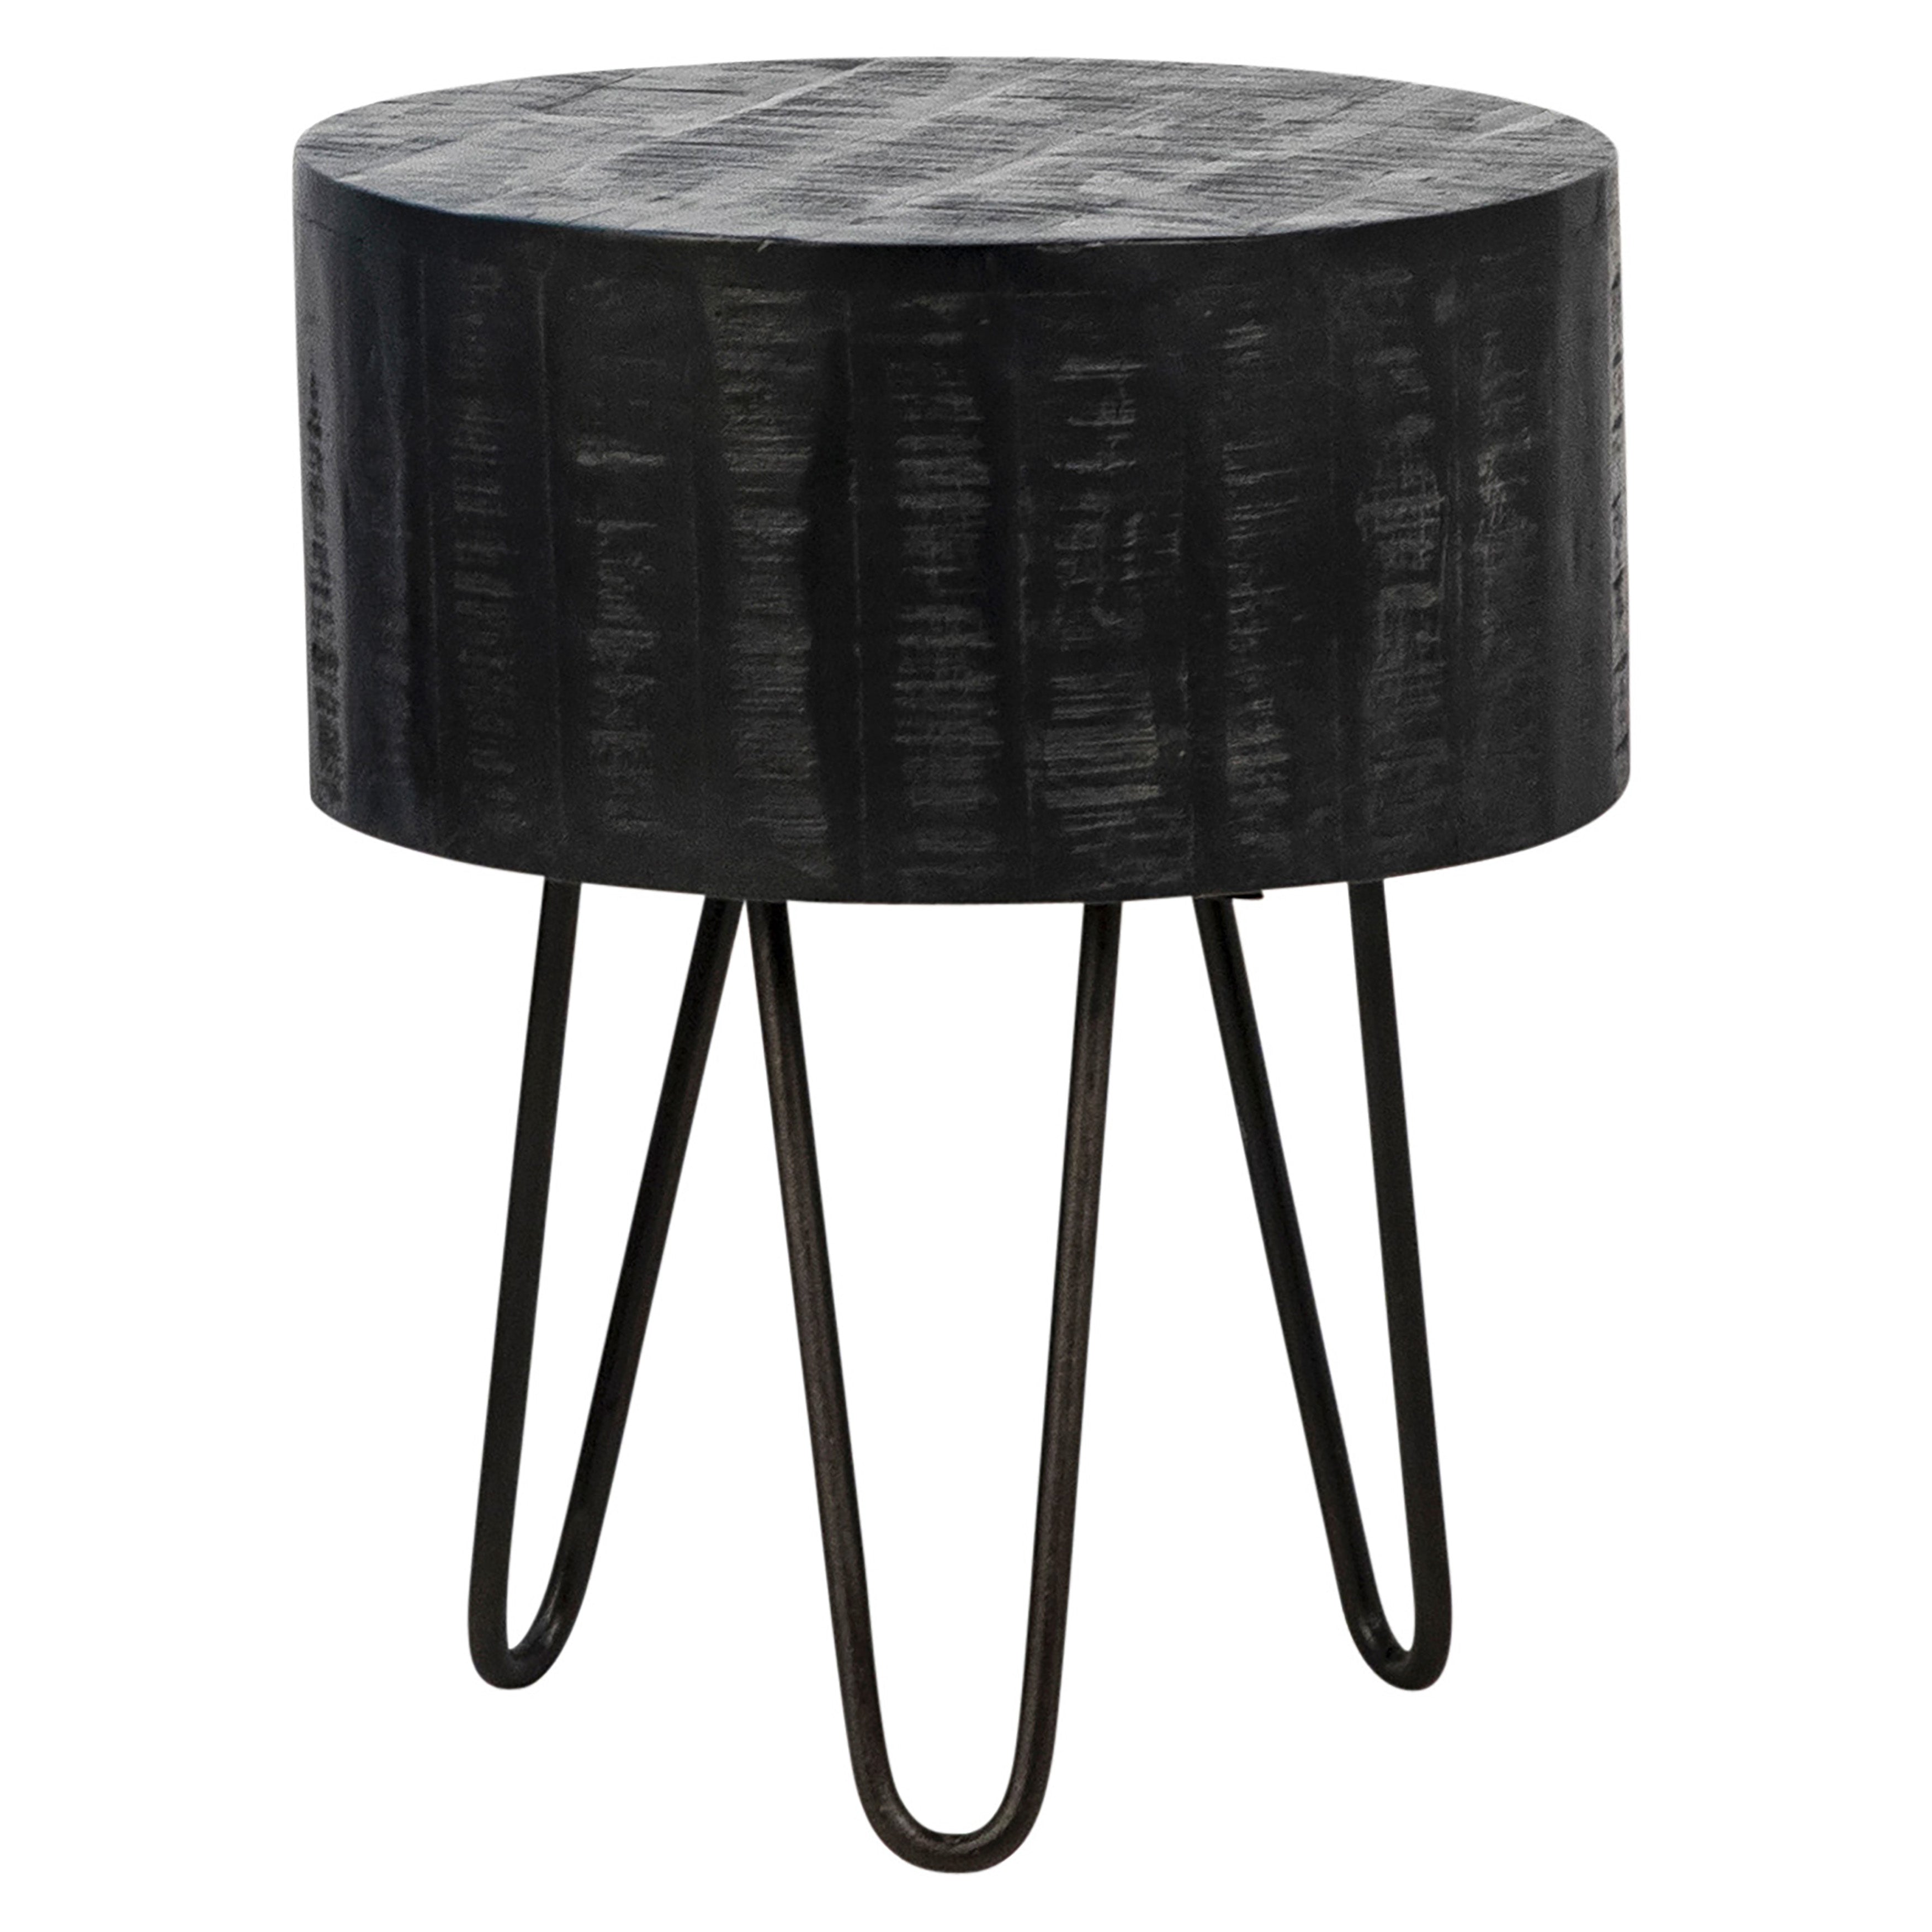 Barocca Side Table - What A Room